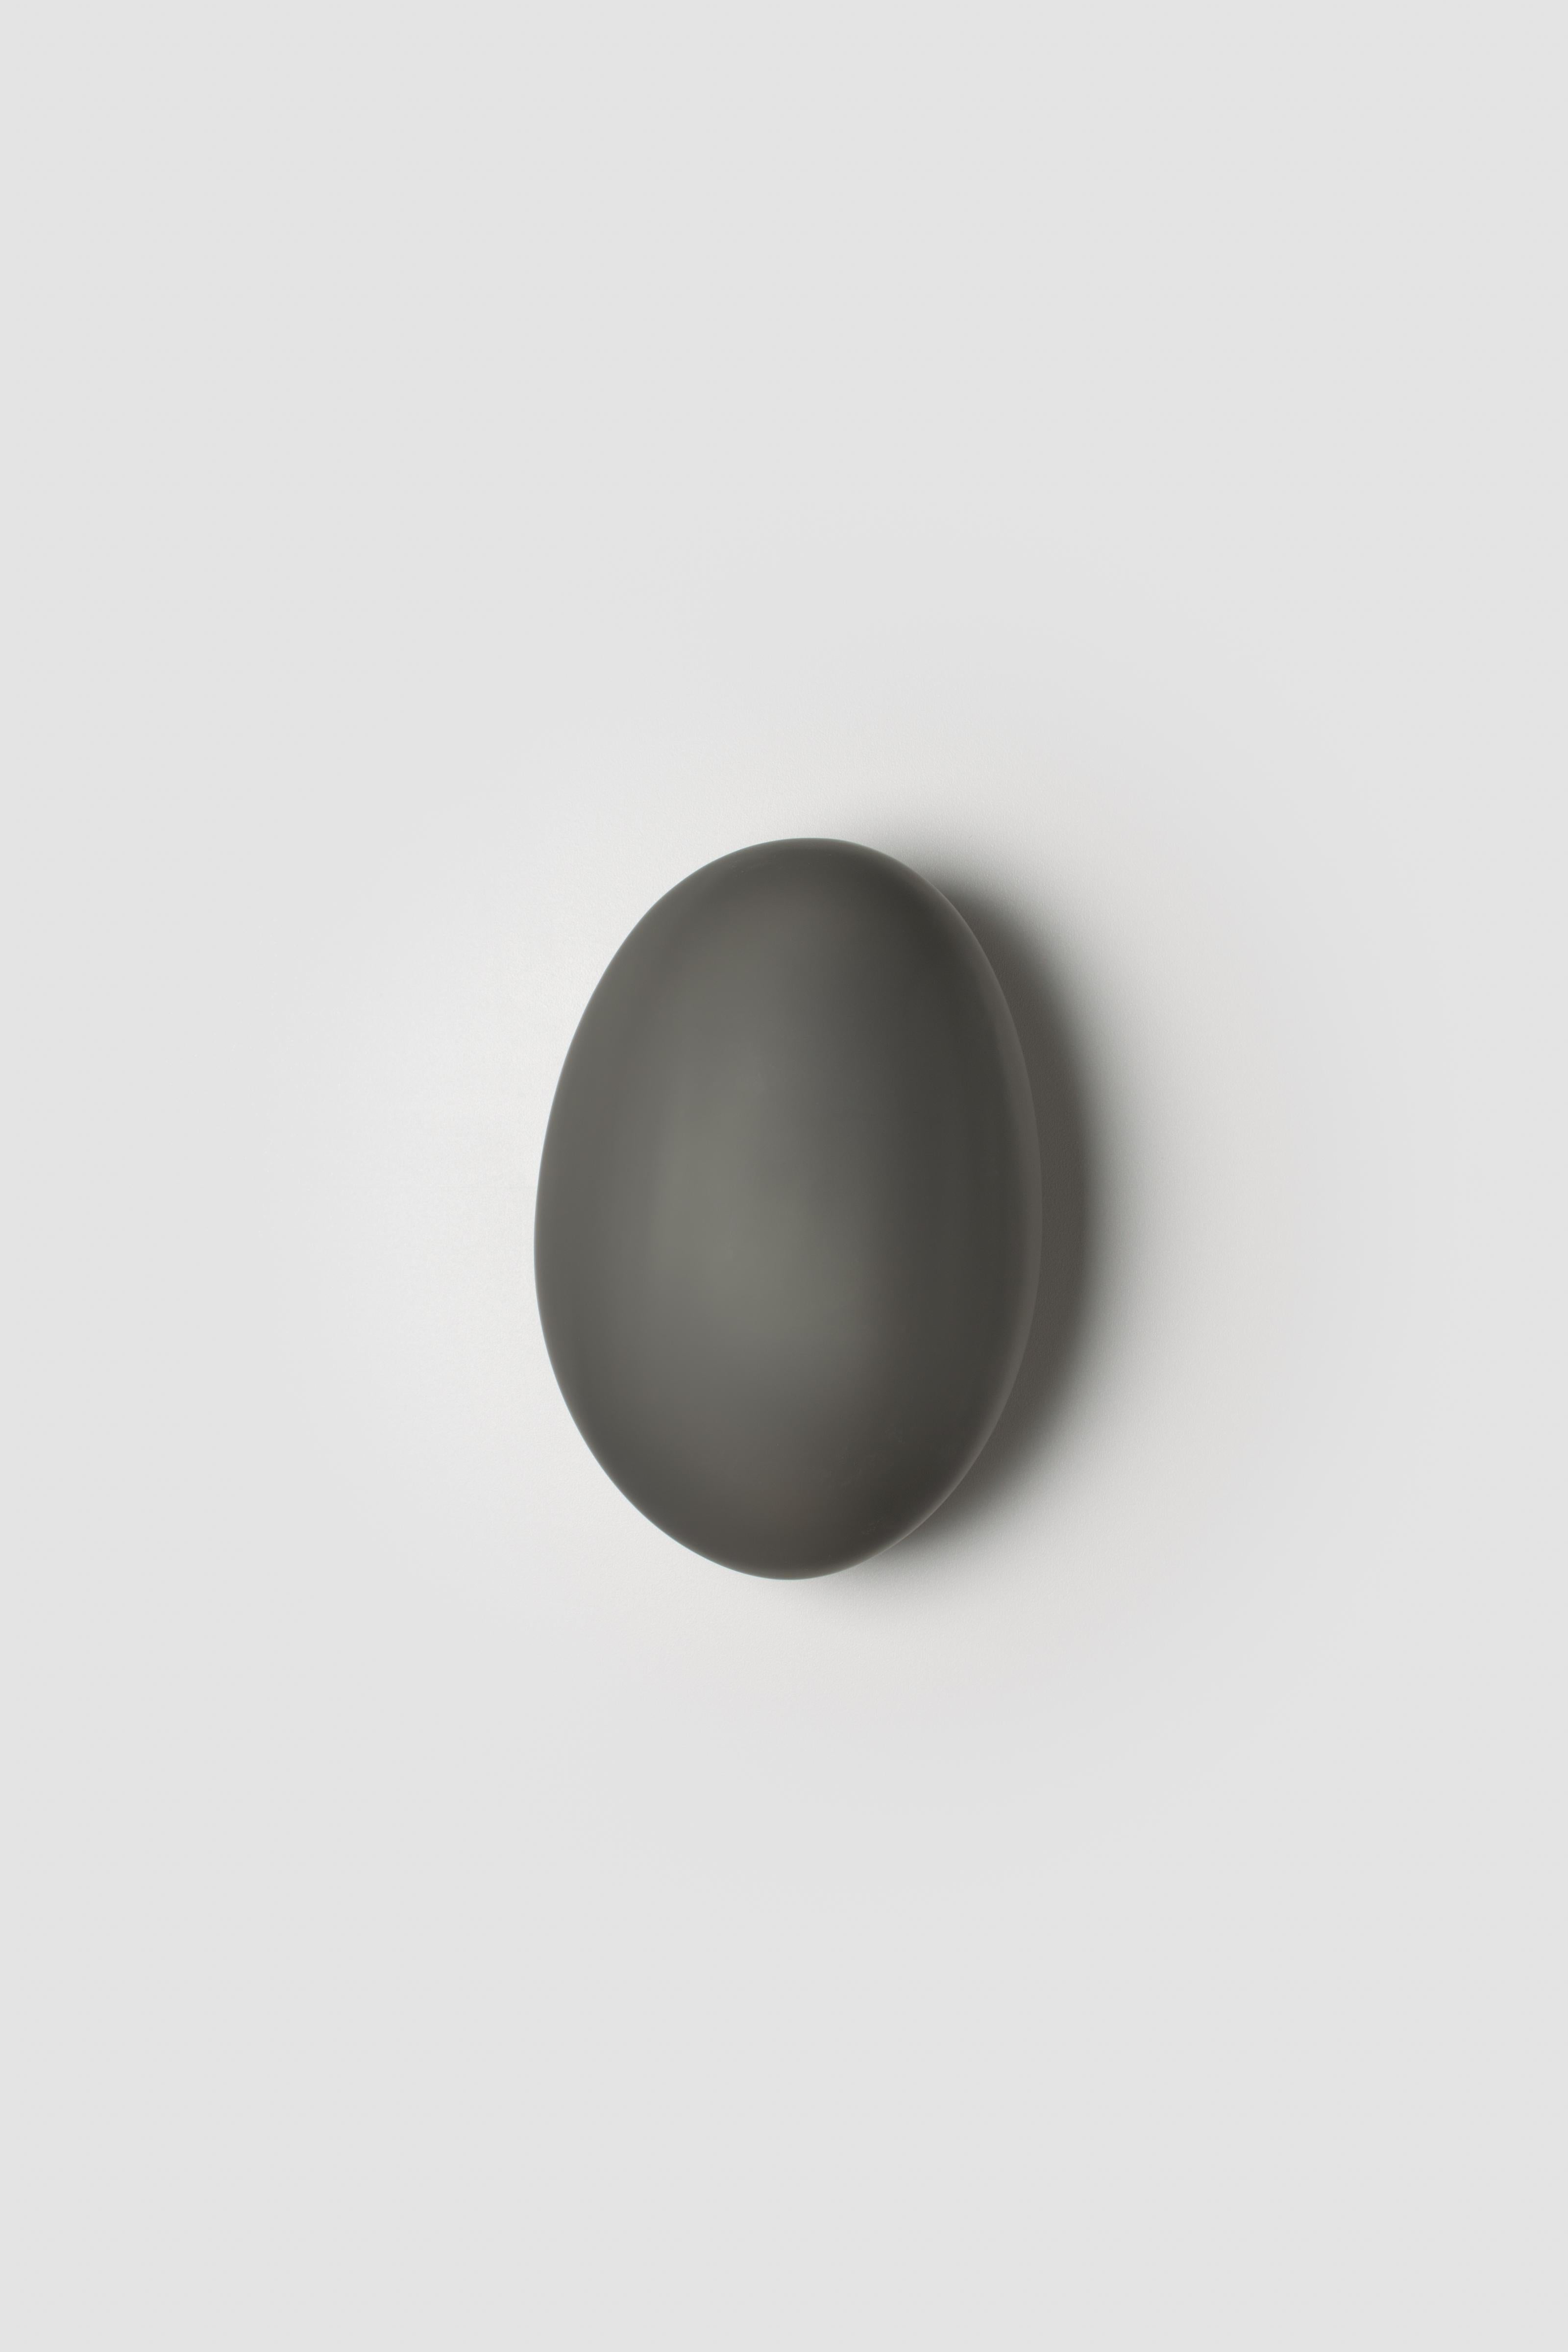 Glass Contemporary Wall Lamp 'Pebble' by Andlight, Shape A, Slate For Sale